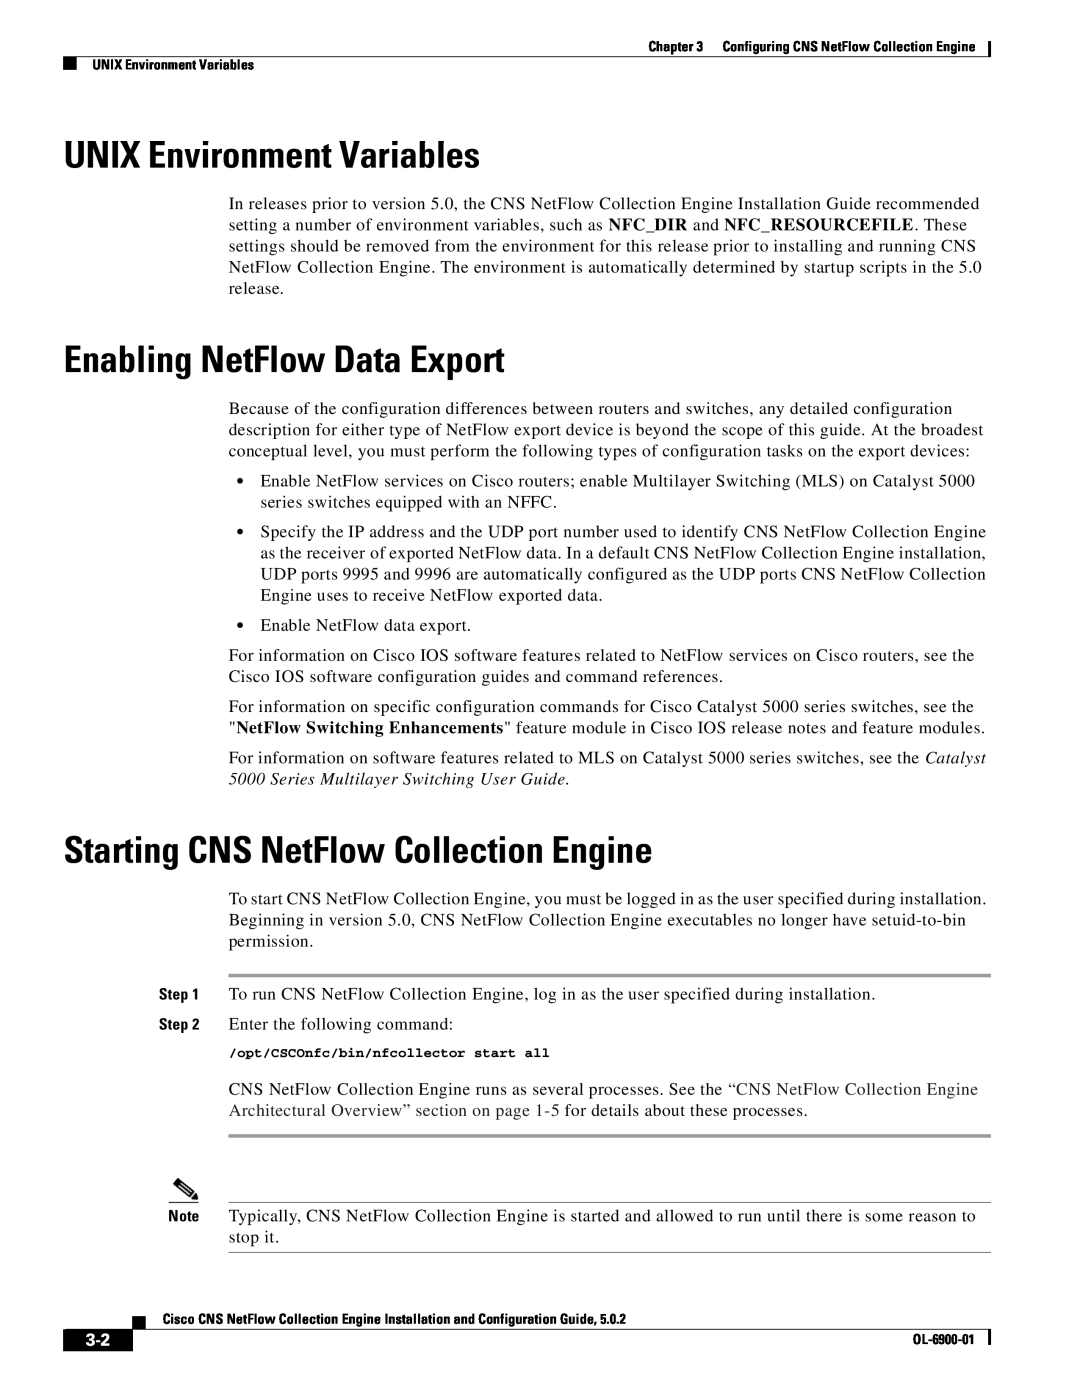 Cisco Systems OL-6900-01 UNIX Environment Variables, Enabling NetFlow Data Export, Starting CNS NetFlow Collection Engine 